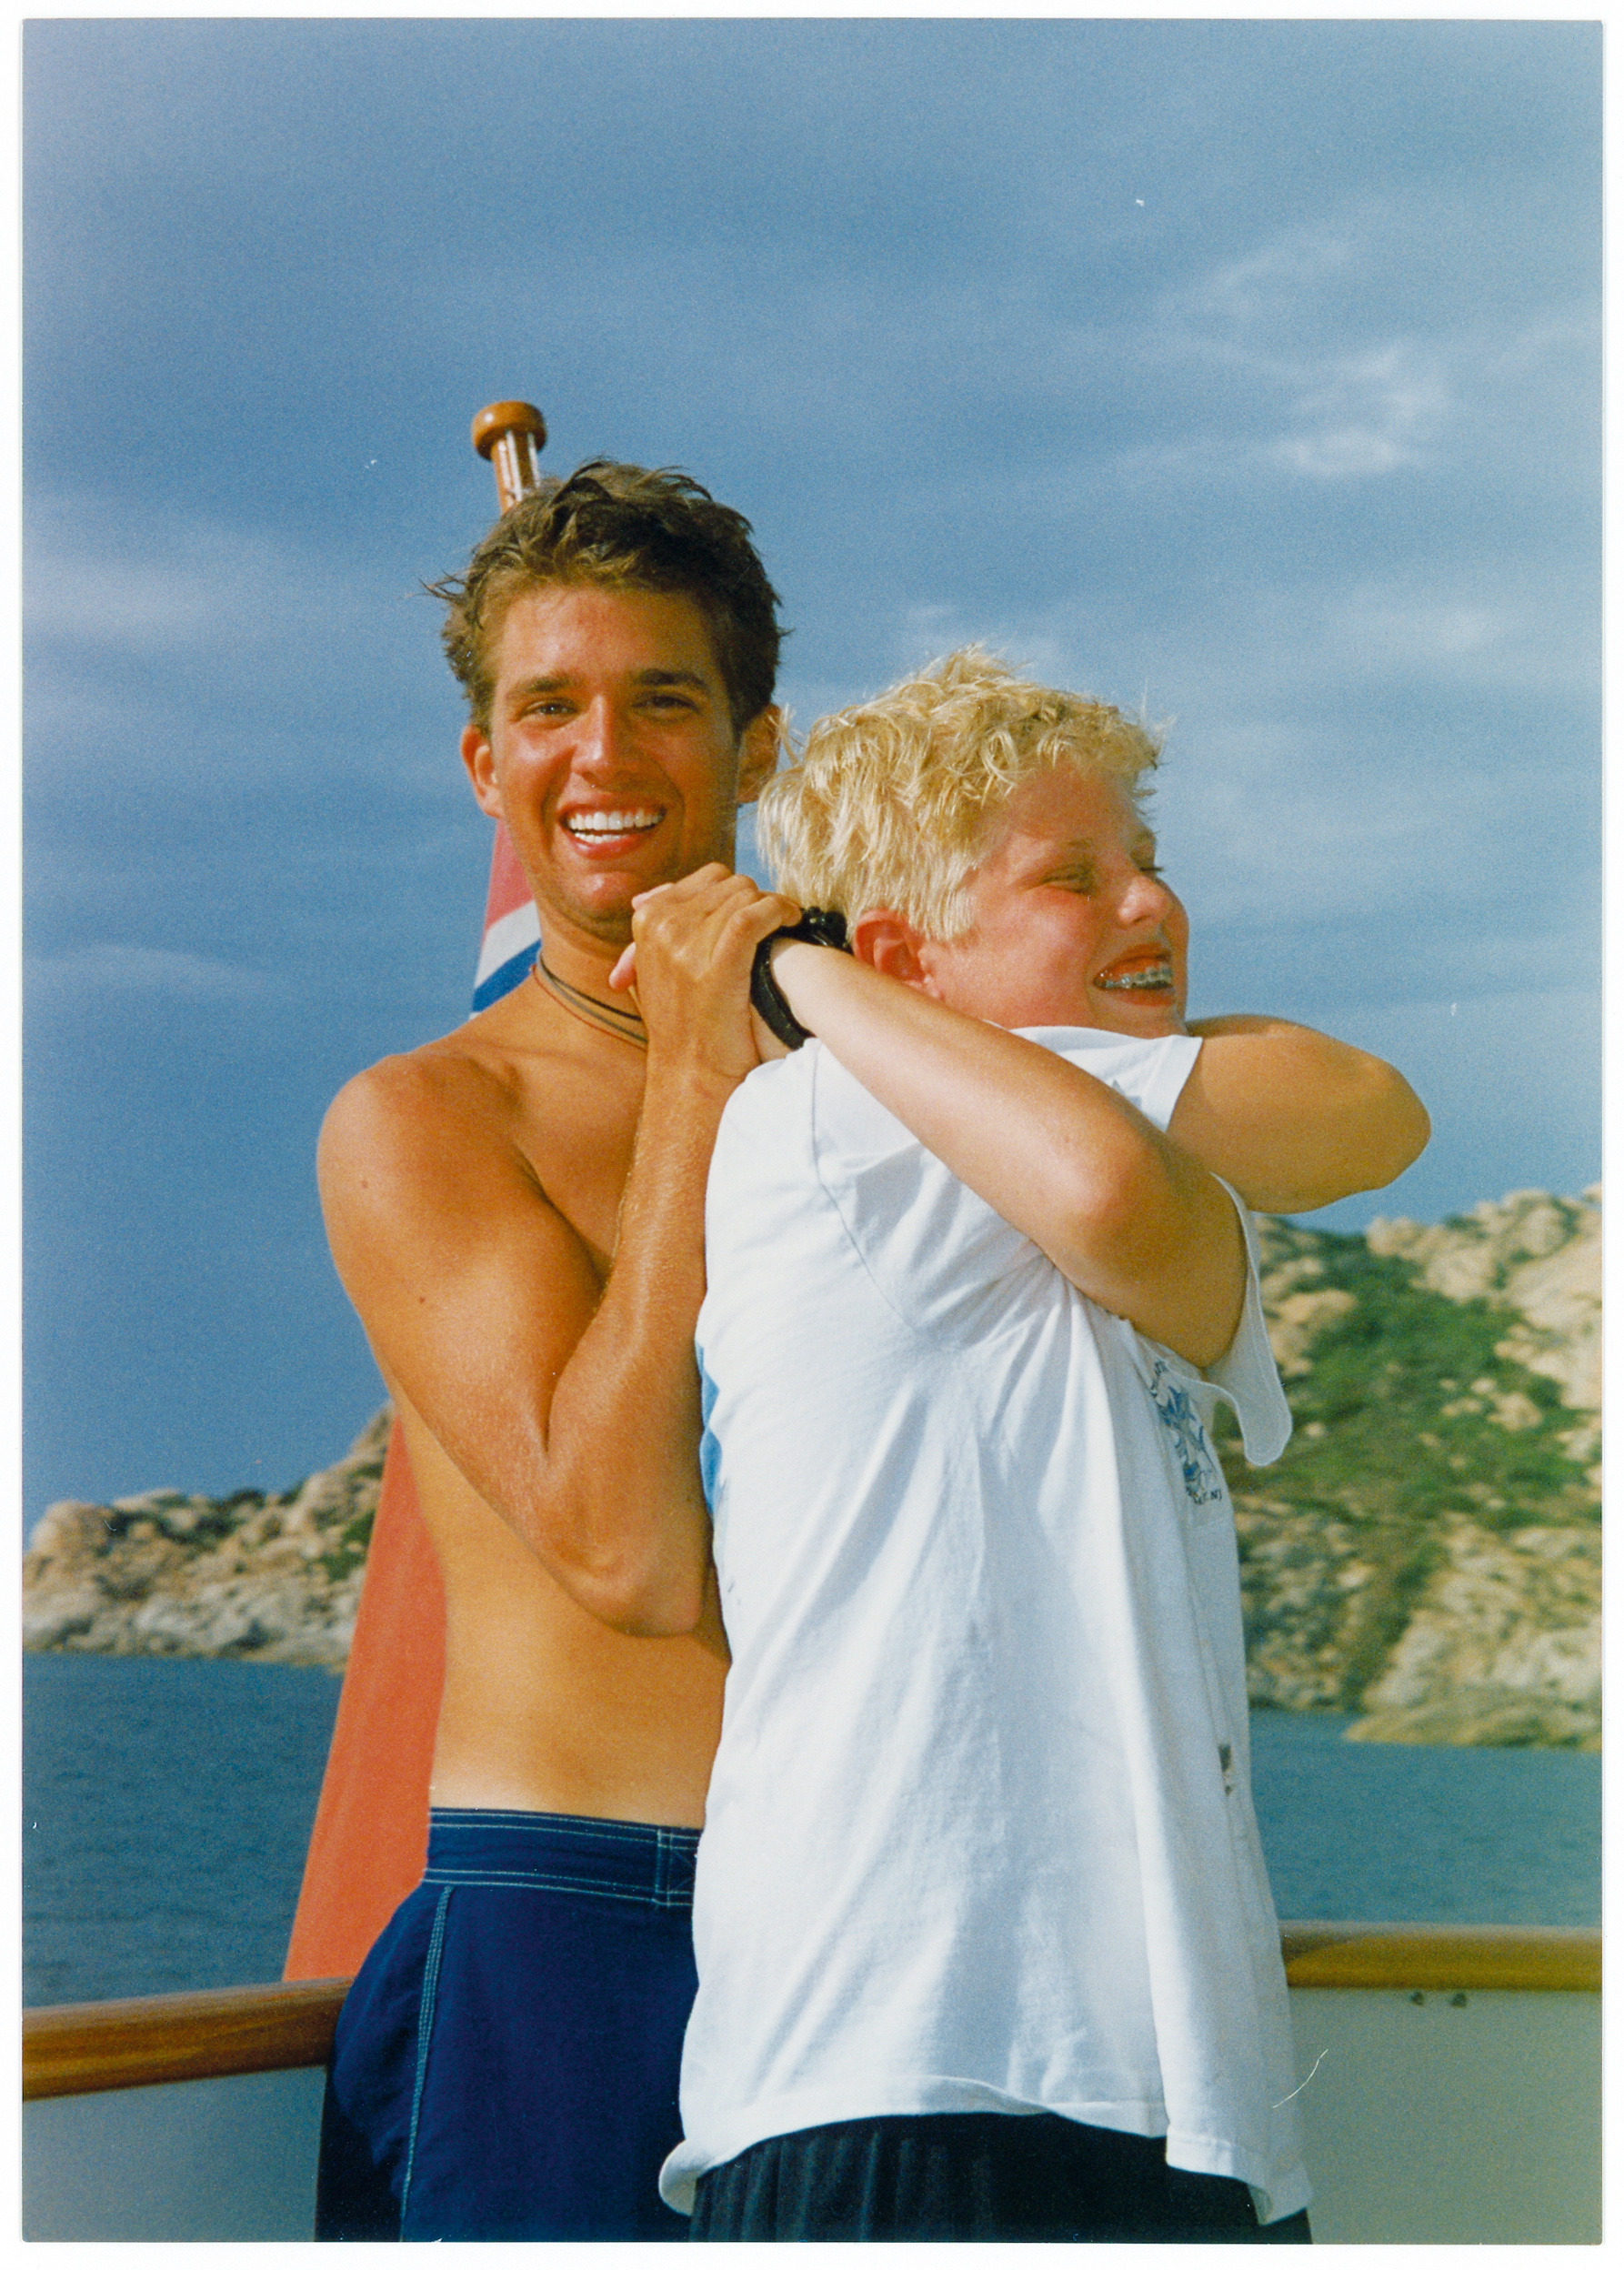 The brothers. A summer moment
                              somewhere off the coast of France,
                              circa 1995.